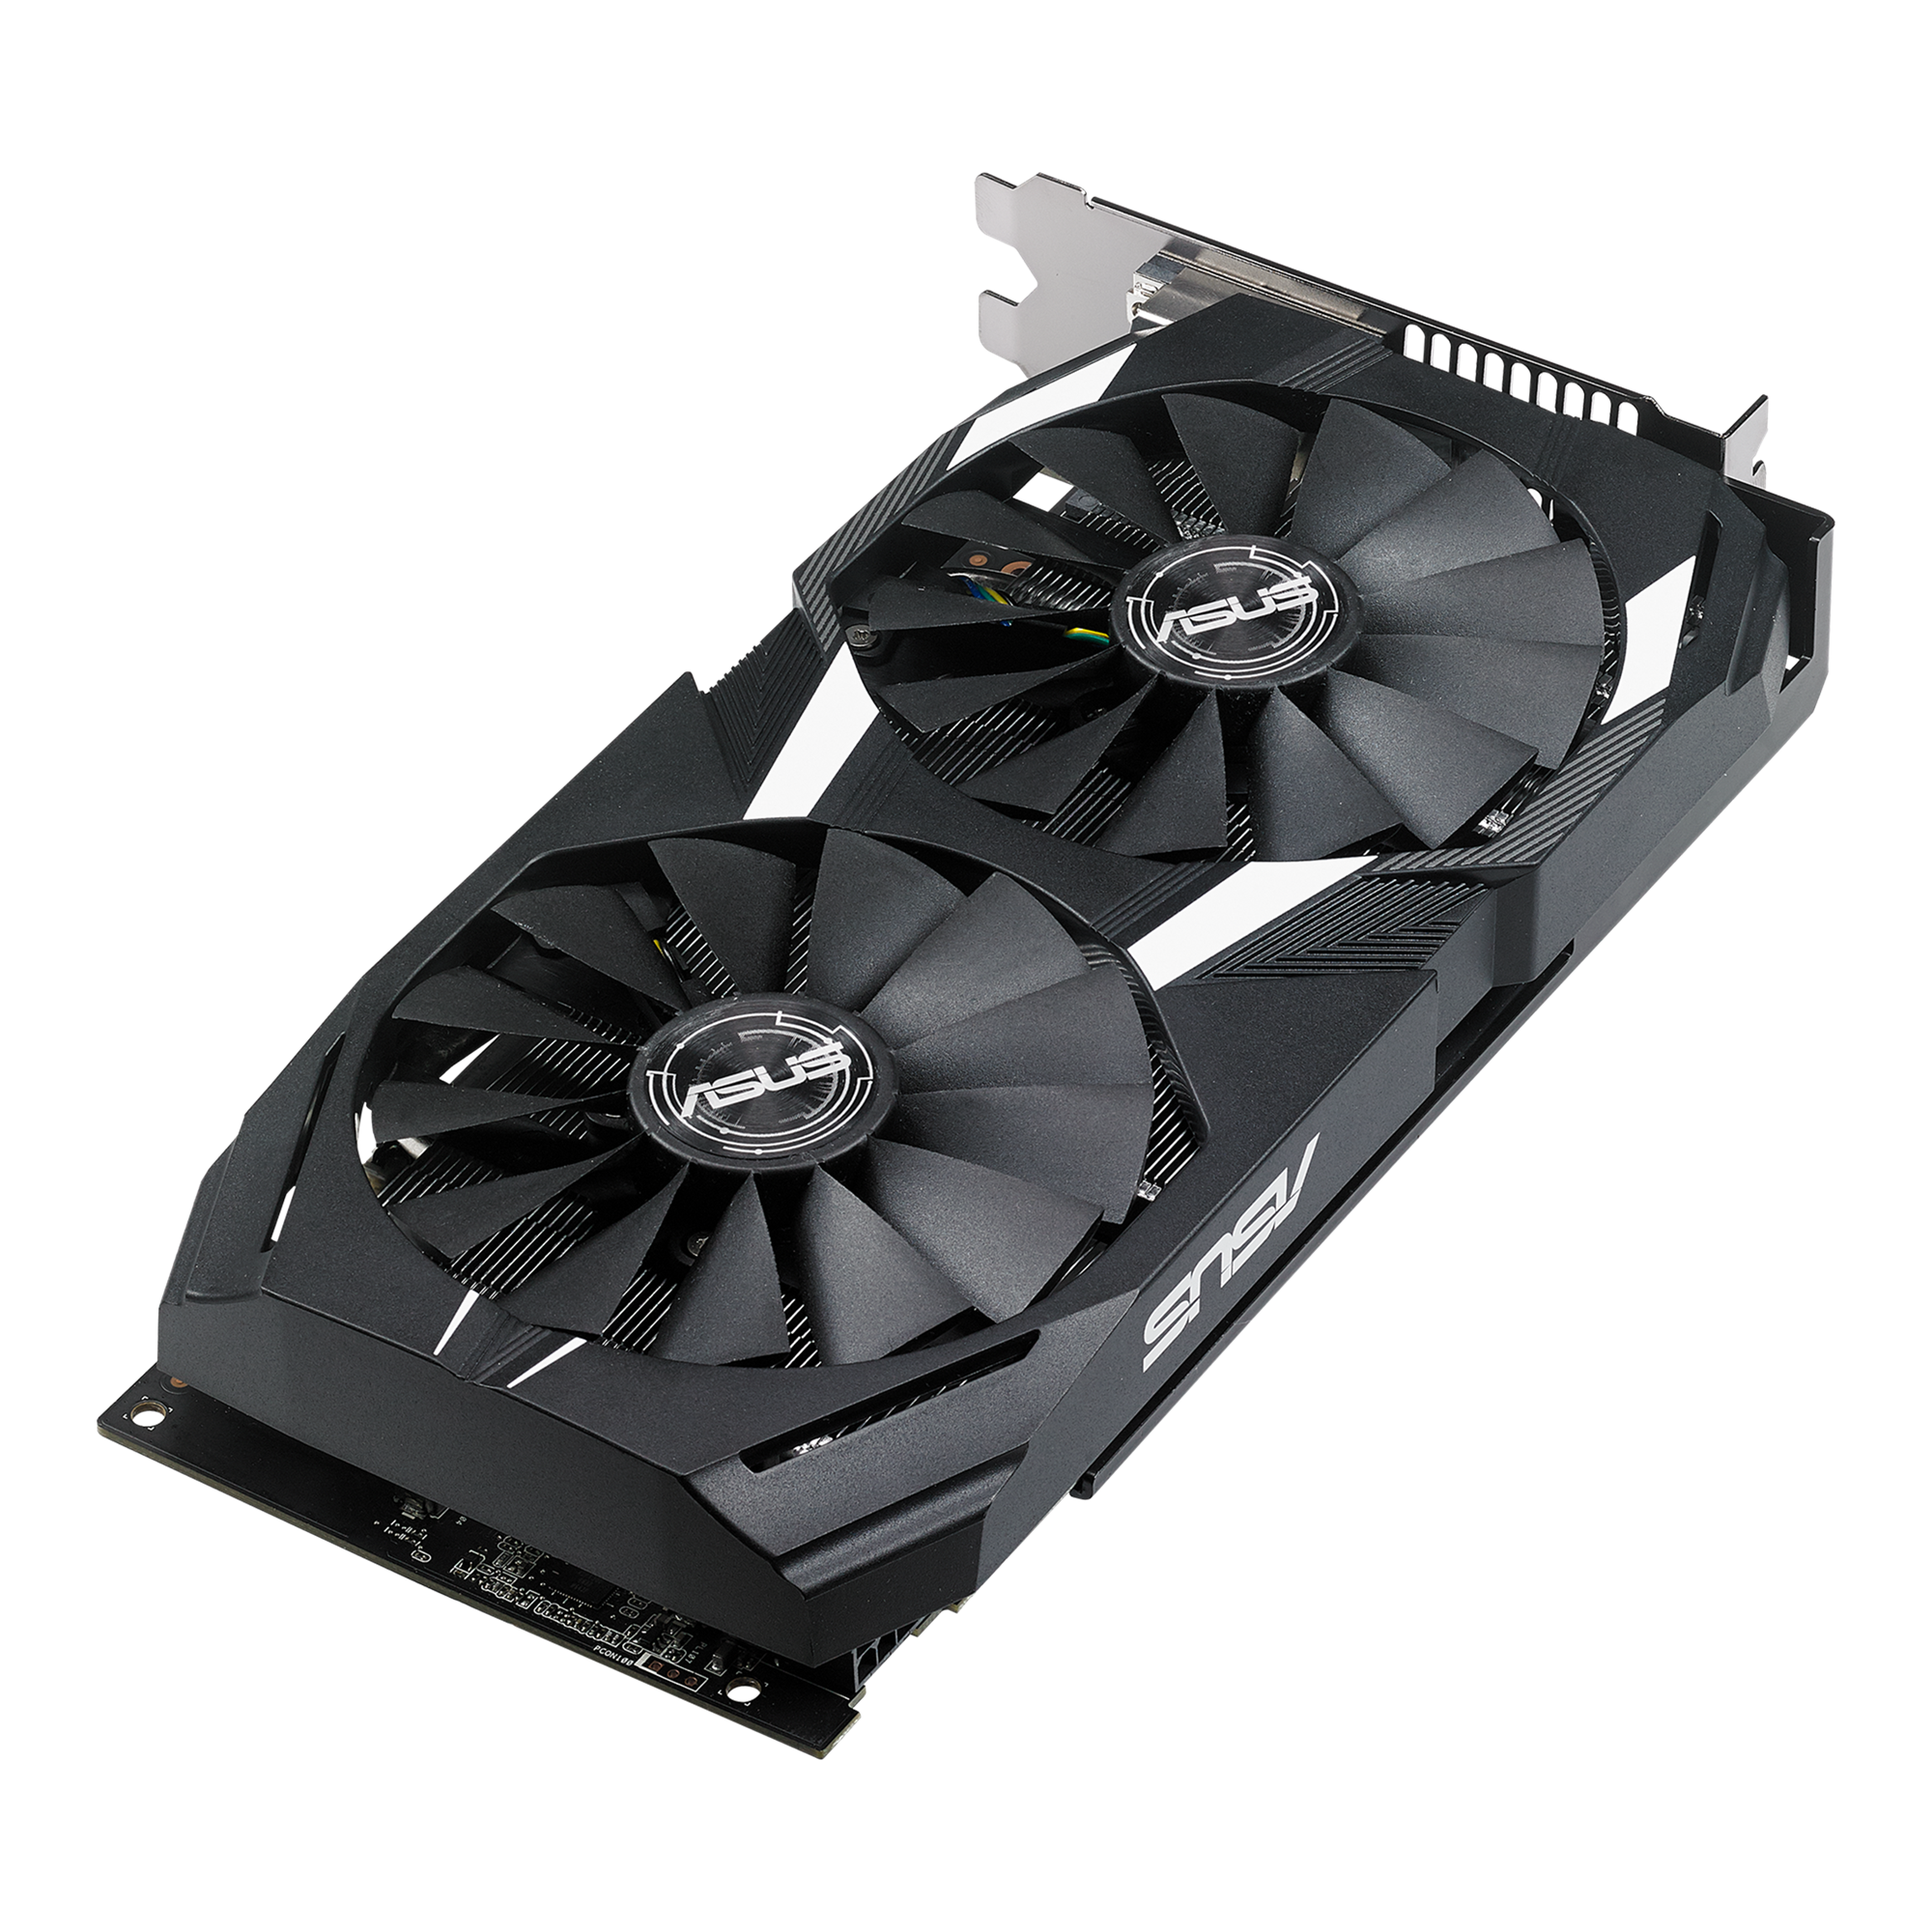 Compound madman excitation DUAL-RX580-O4G｜Graphics Cards｜ASUS Global